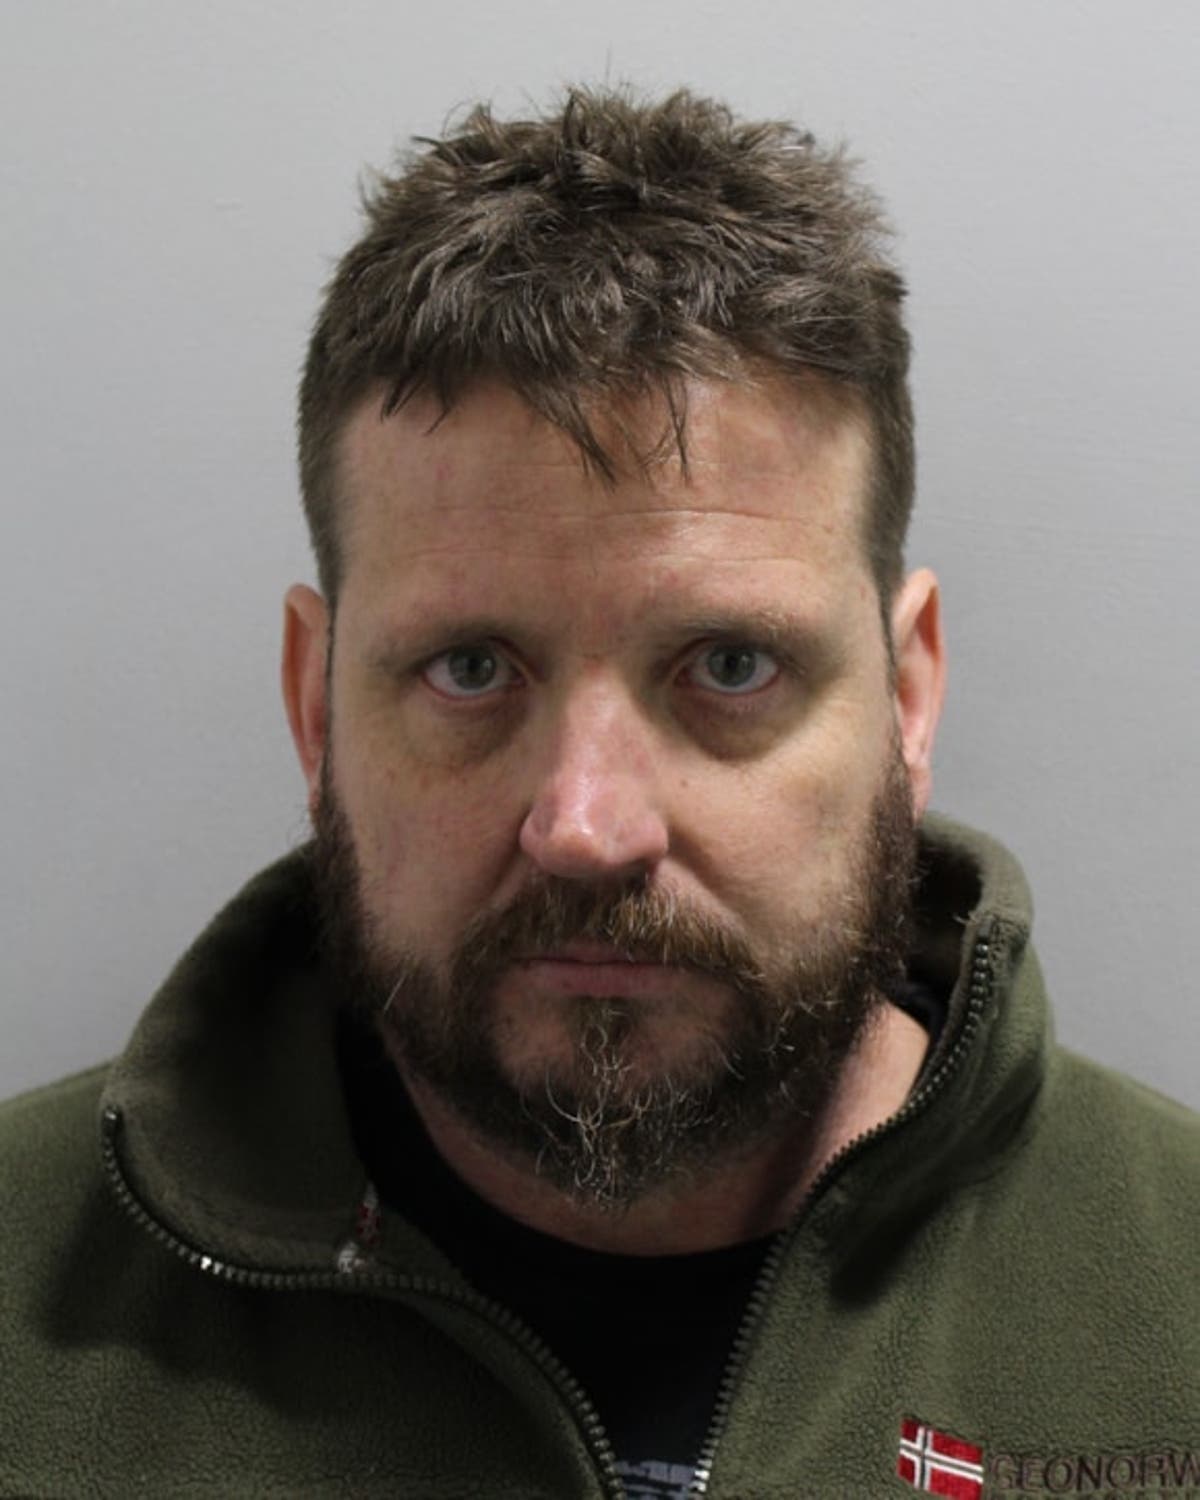 London plumber who converted blank firing guns into deadly weapons jailed for seven years